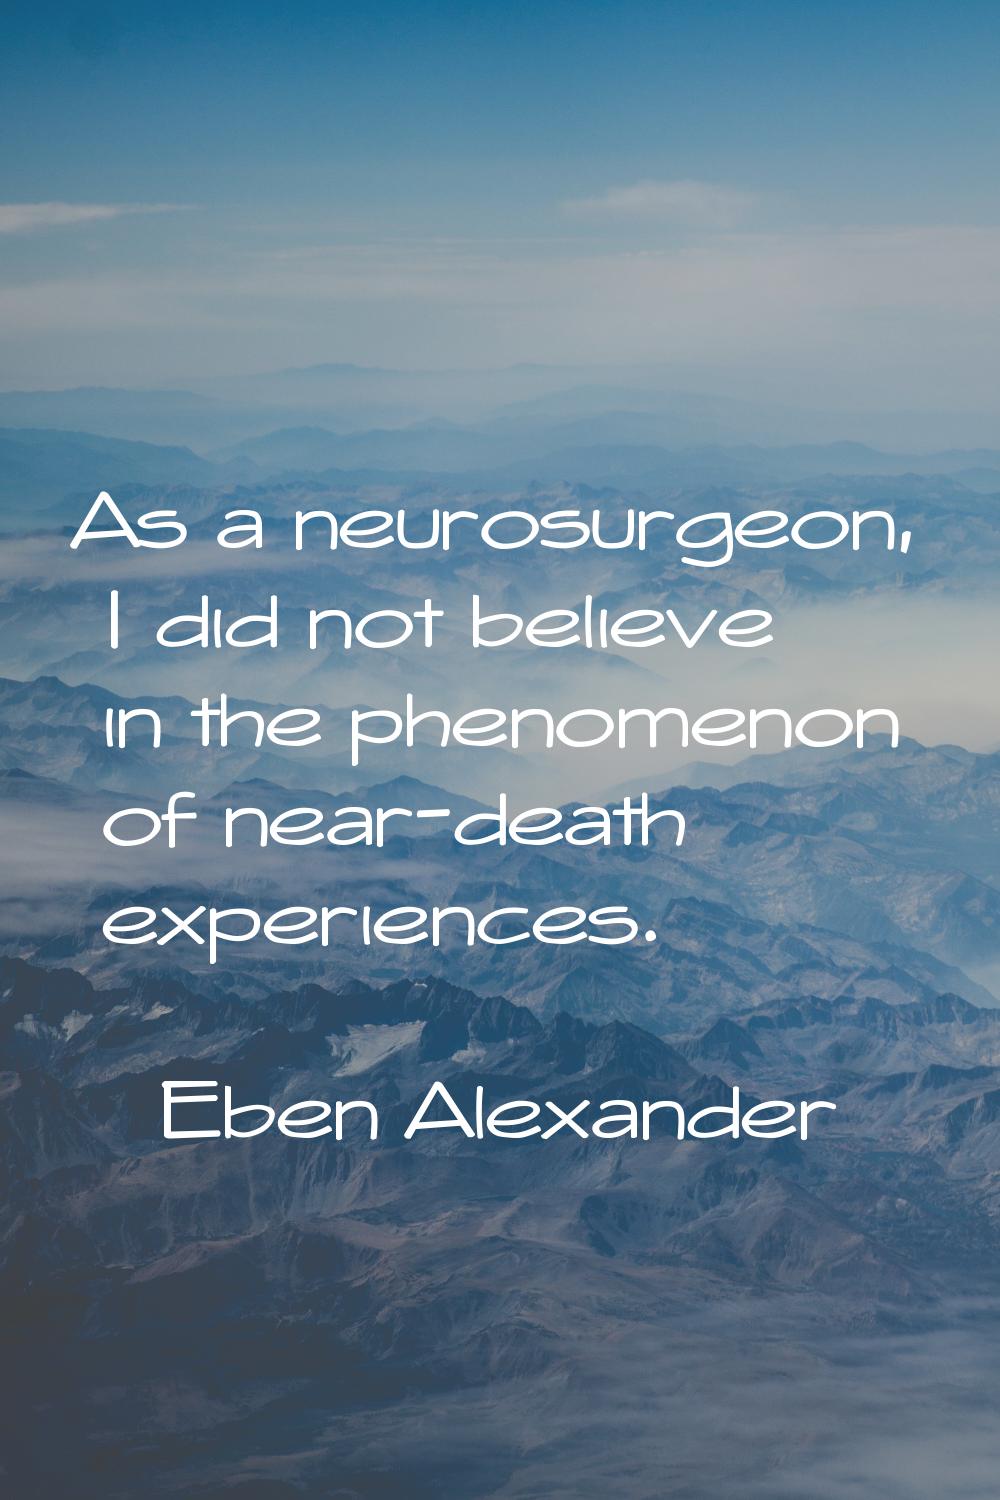 As a neurosurgeon, I did not believe in the phenomenon of near-death experiences.